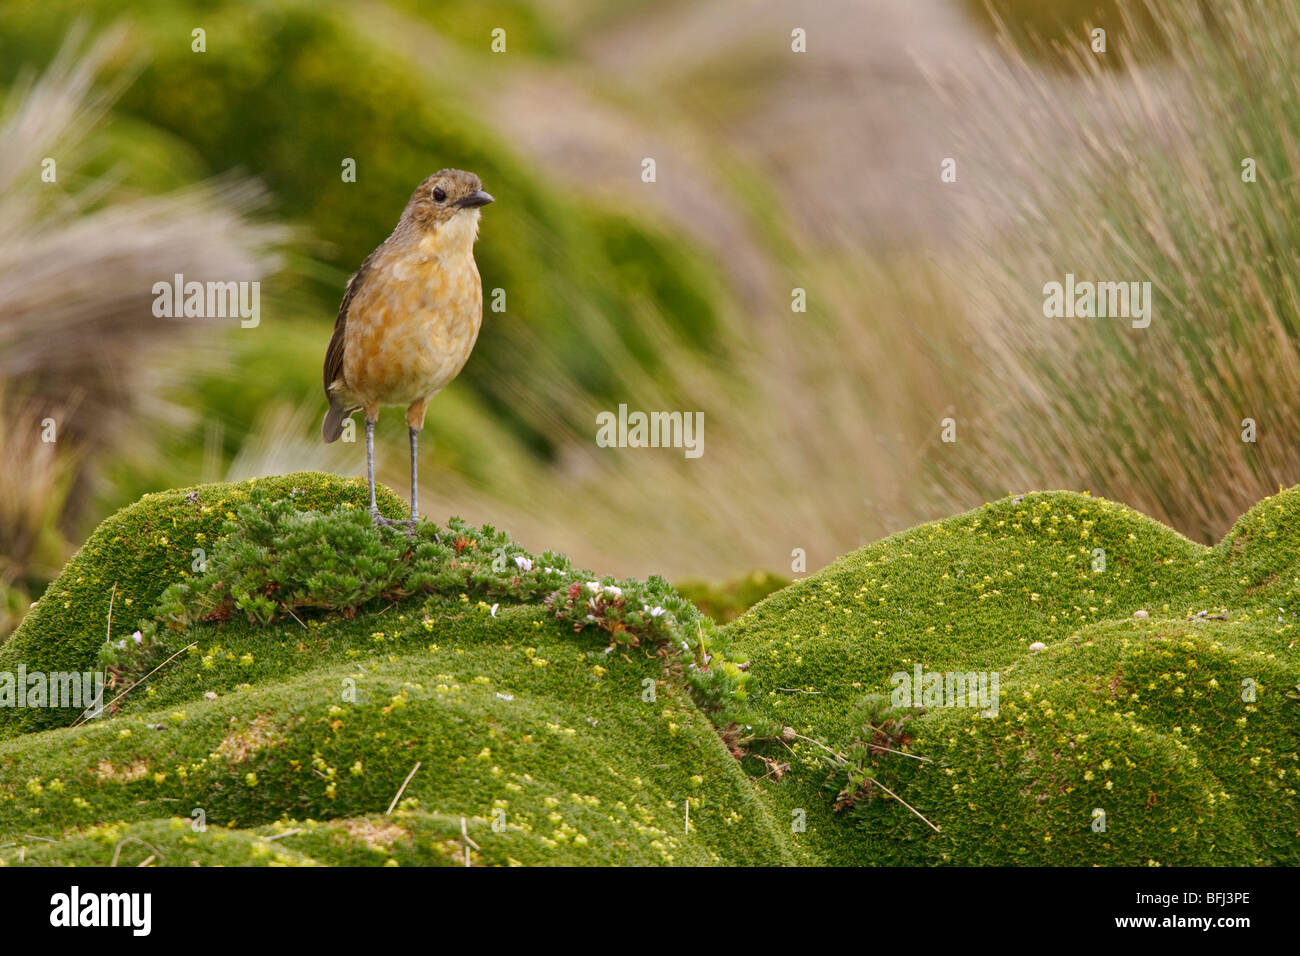 Tawny Antpitta (Grallaria quitensis) perched on paramo vegetation in the highlands of Ecuador. Stock Photo